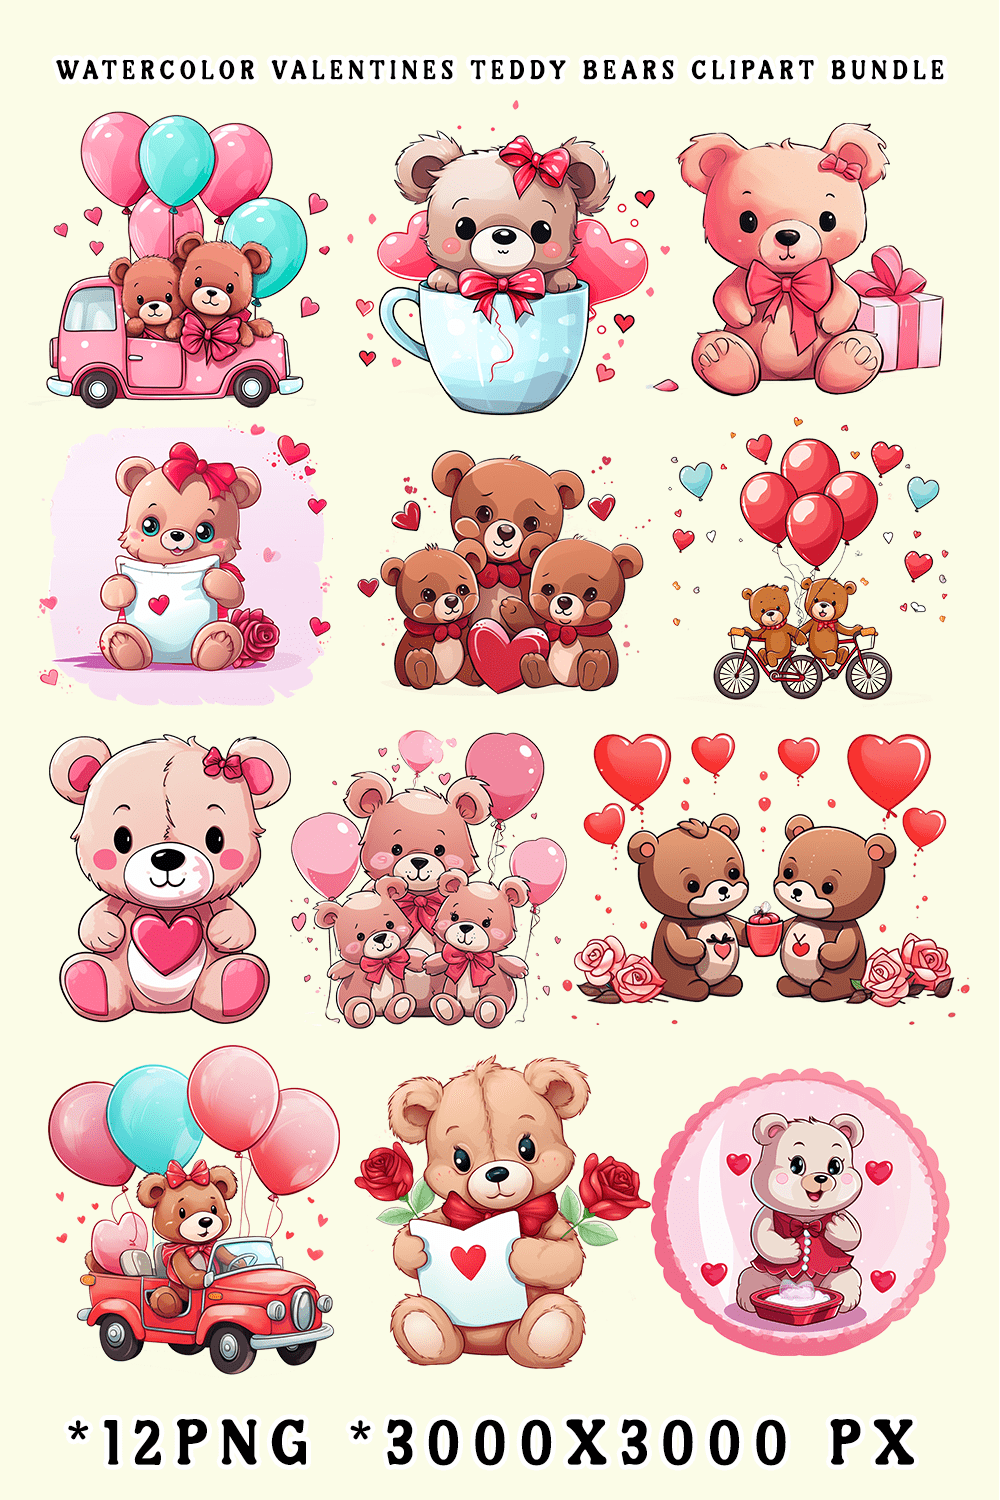 Watercolor Valentines Teddy Bears Clipart Bundle pinterest preview image.